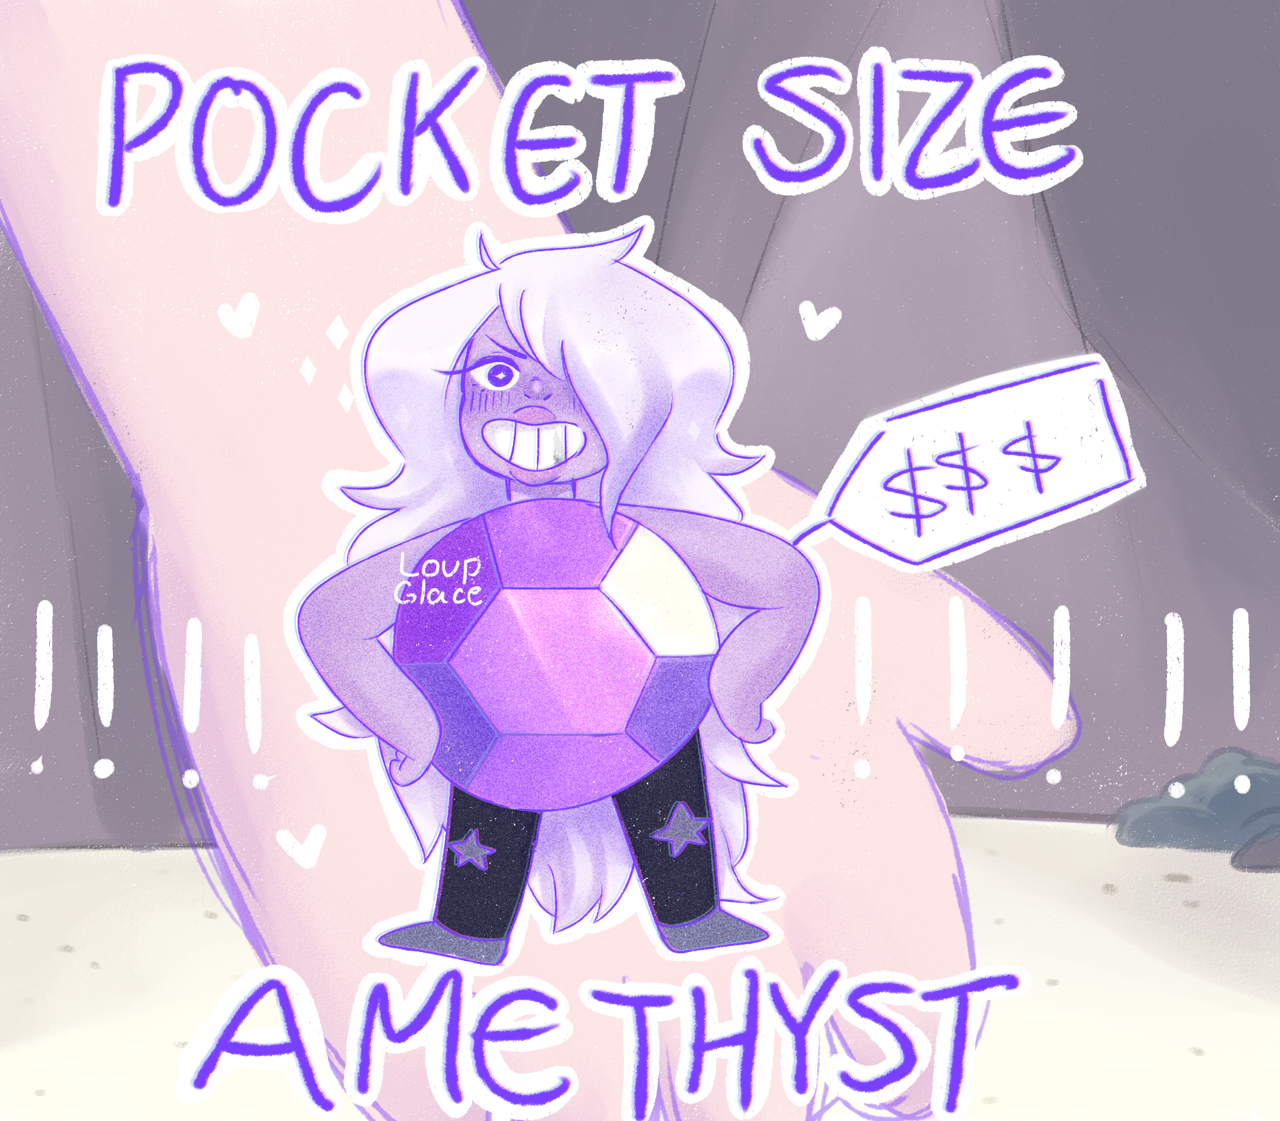 I WANT!!!A LITTLE AMETHYST!!!! LIKE THIS!!,,, please :((( Rebecca please 💔